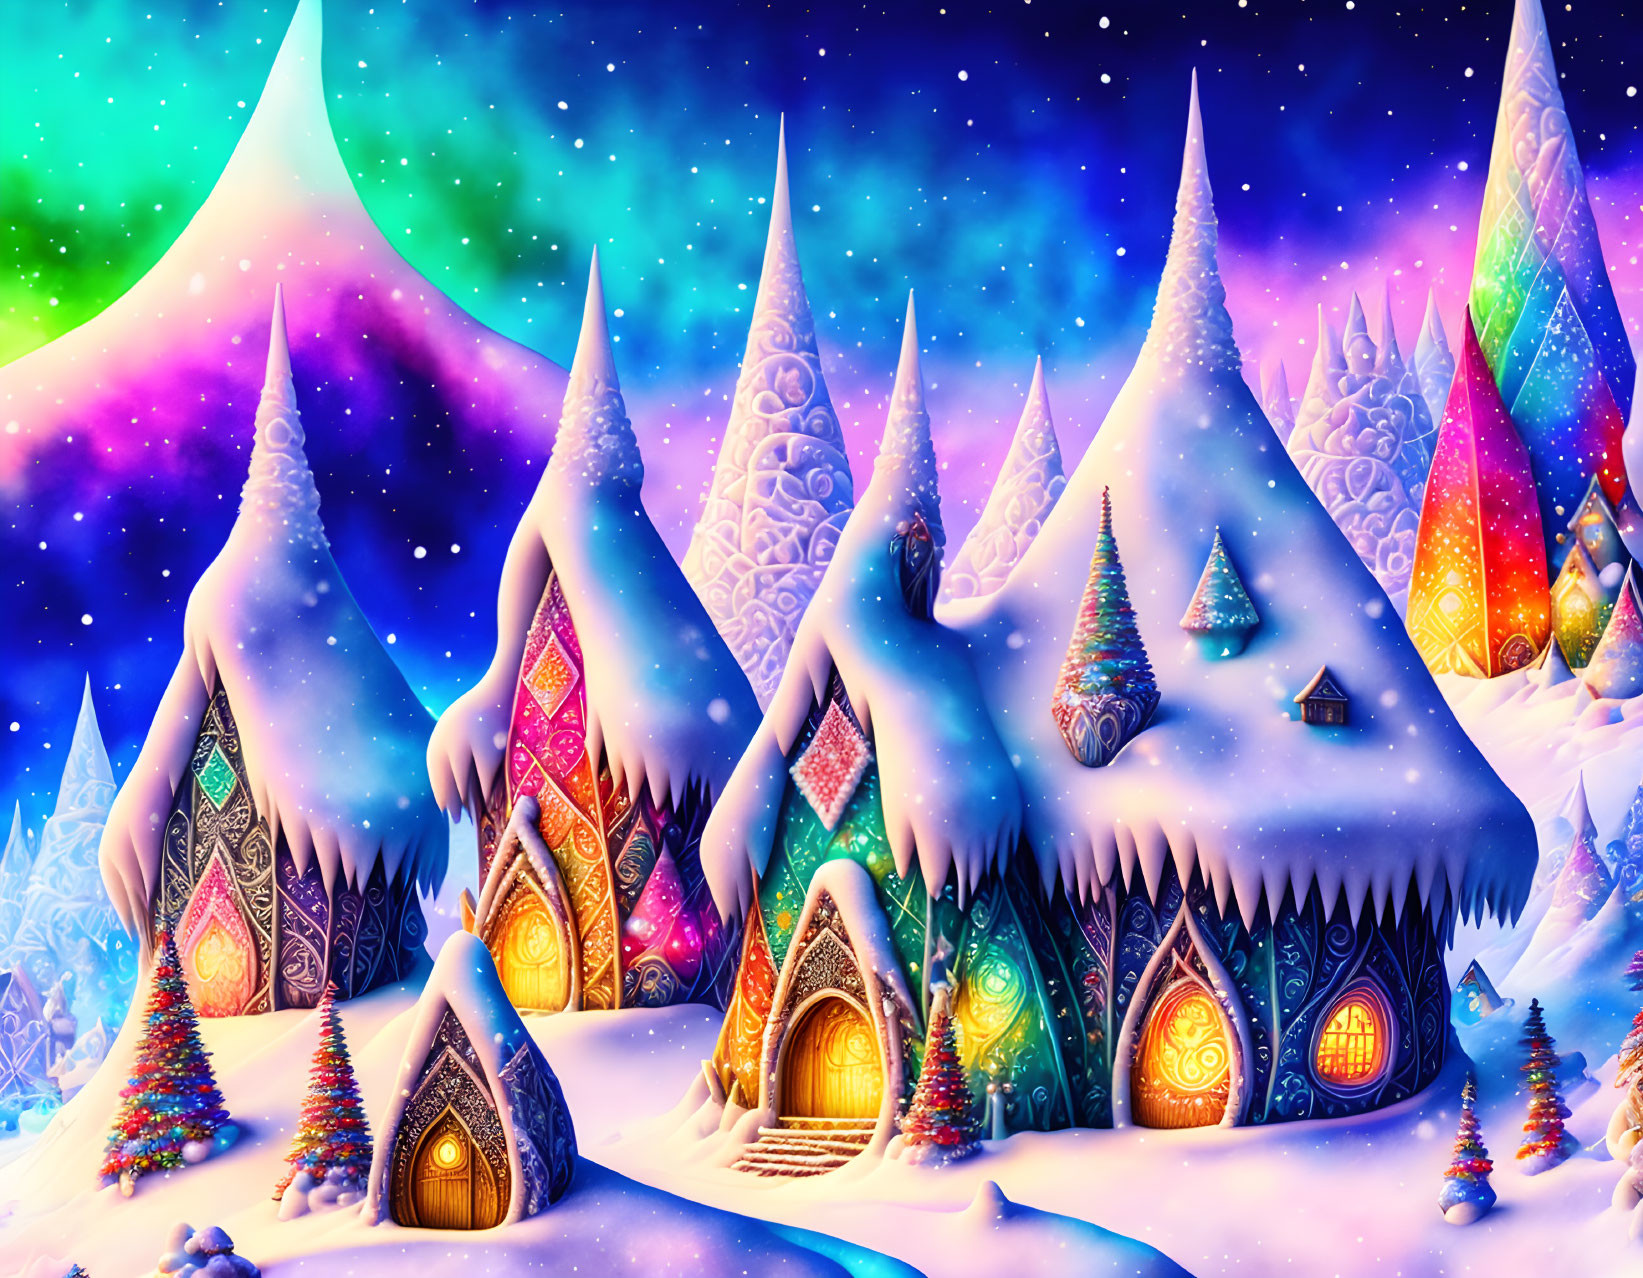 Colorful Winter Fantasy Scene with Whimsical Houses and Trees